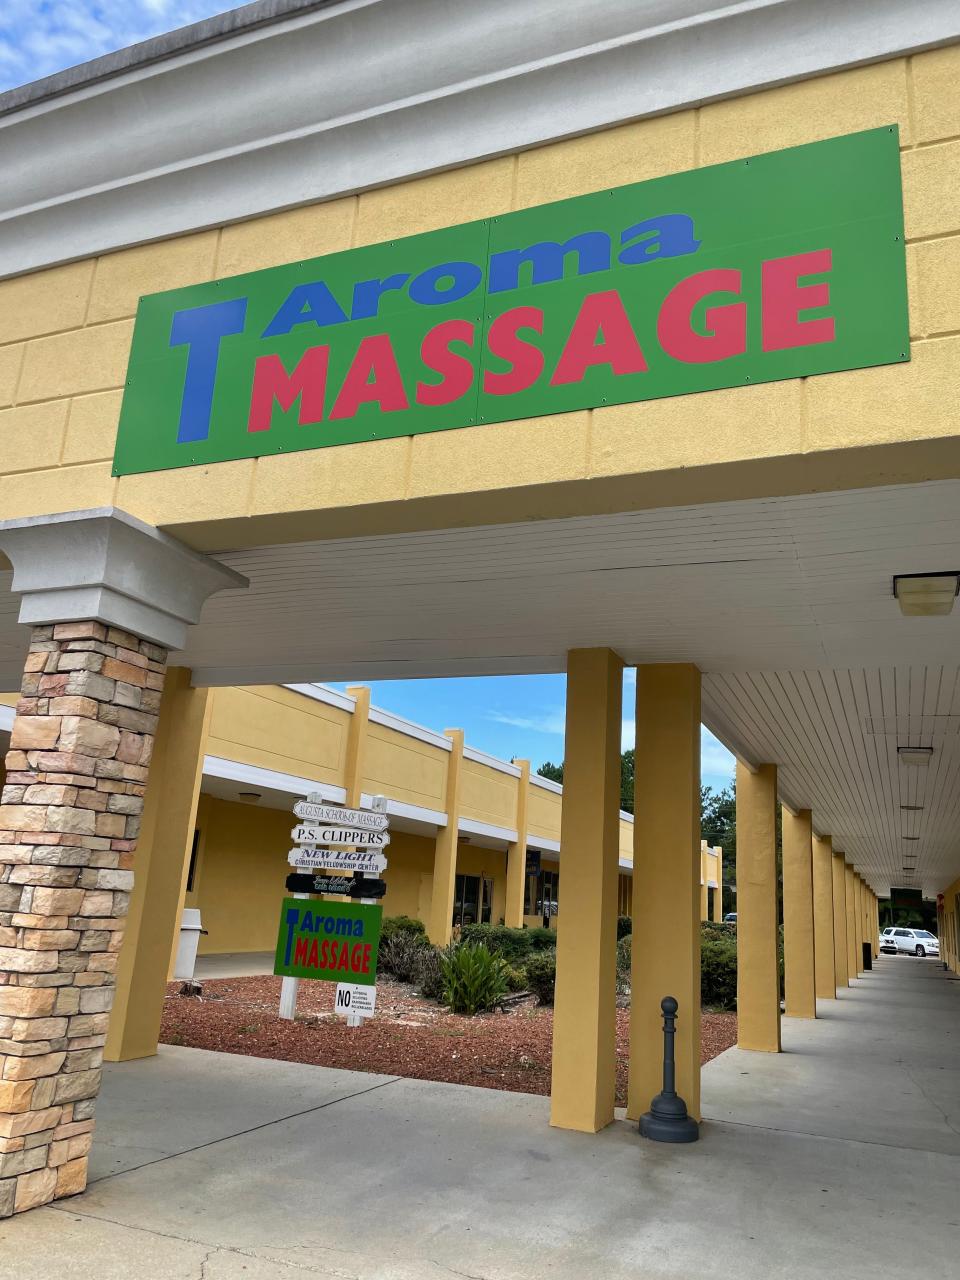 T Aroma Massage at 401 W. Martintown Road in North Augusta is being investigated for prostitution and sex trafficking, according to Aiken County search warrants.